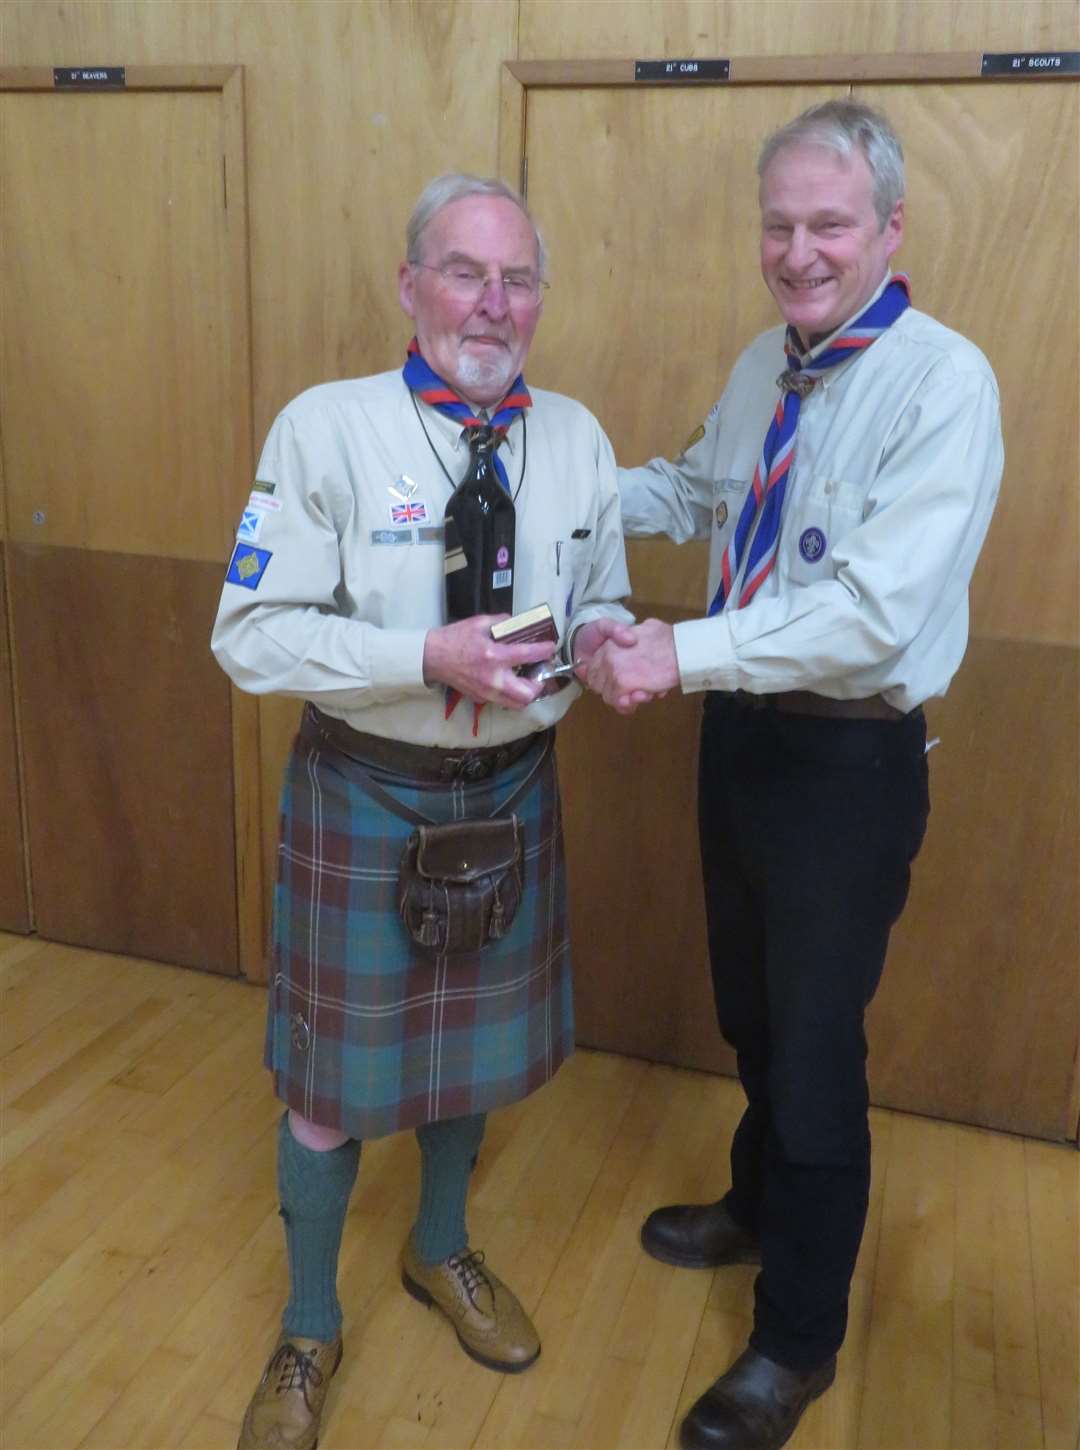 Duncan Chisholm being presented with a quoich by Group Scout Leader Eivor Dempster.